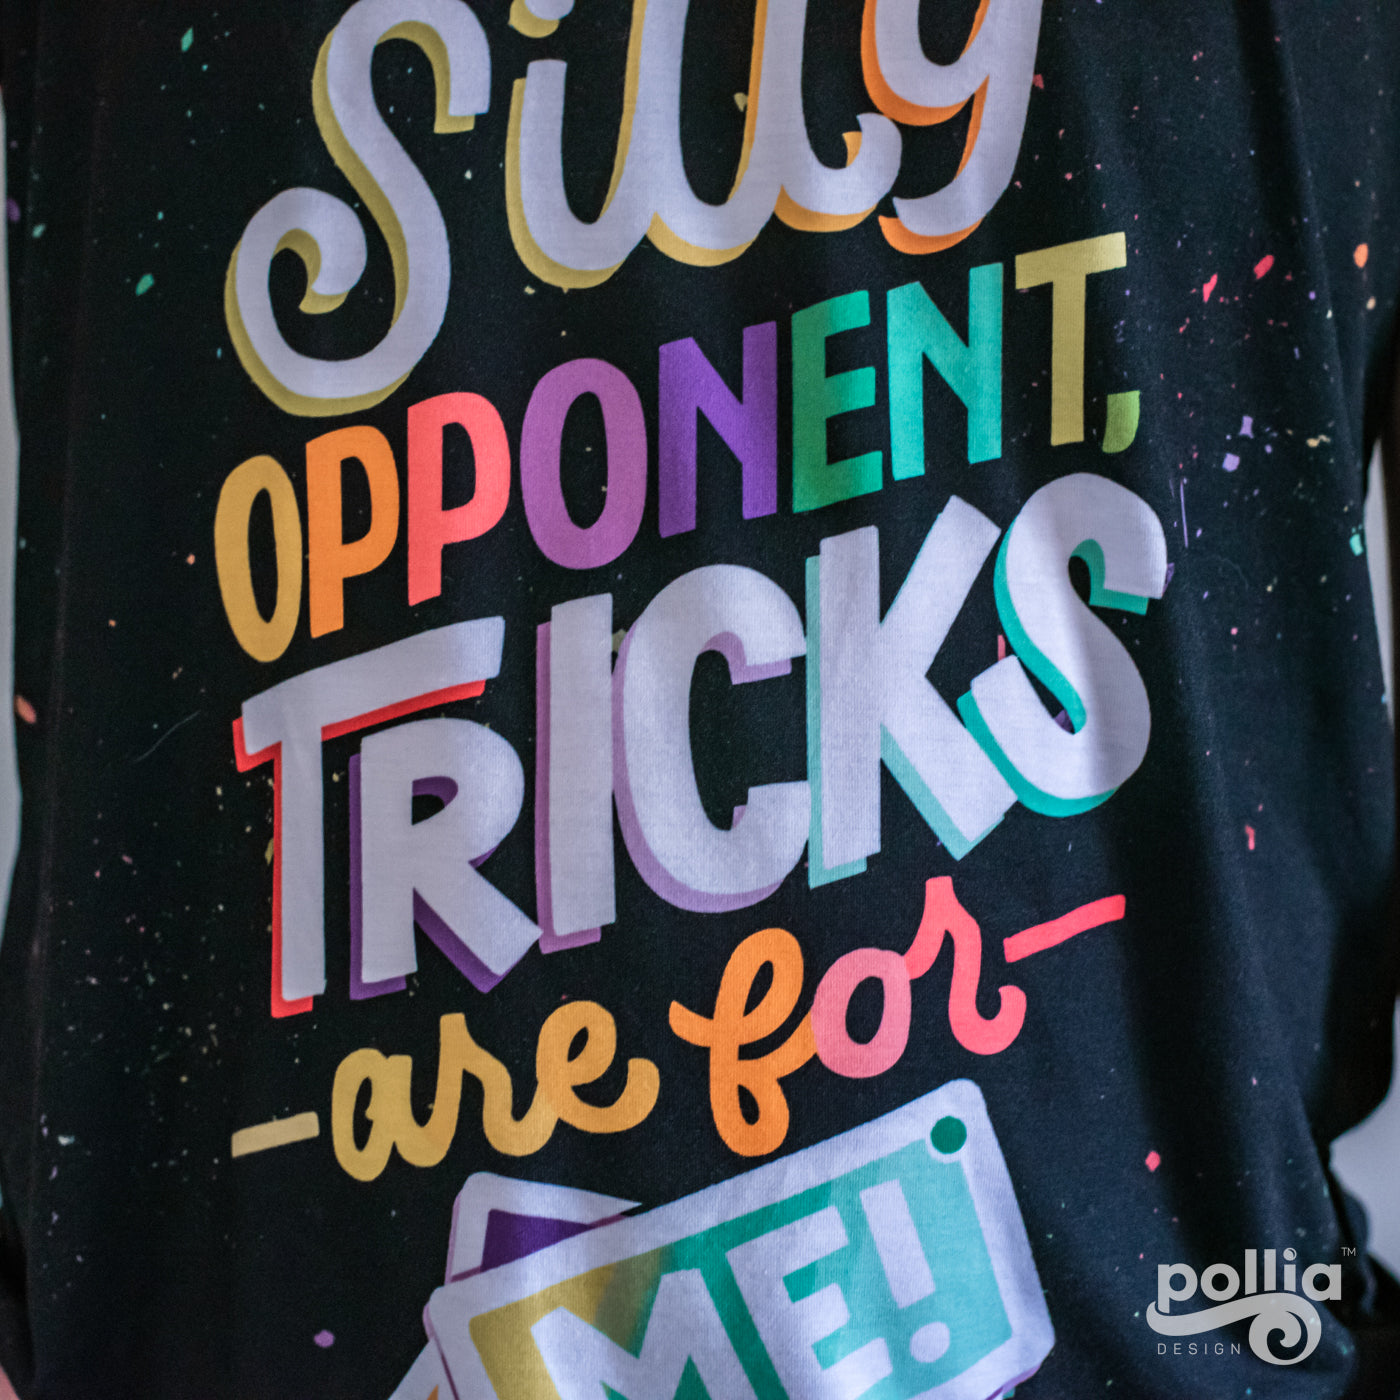 Silly Opponent, Tricks are for Me! Men's Tank Top